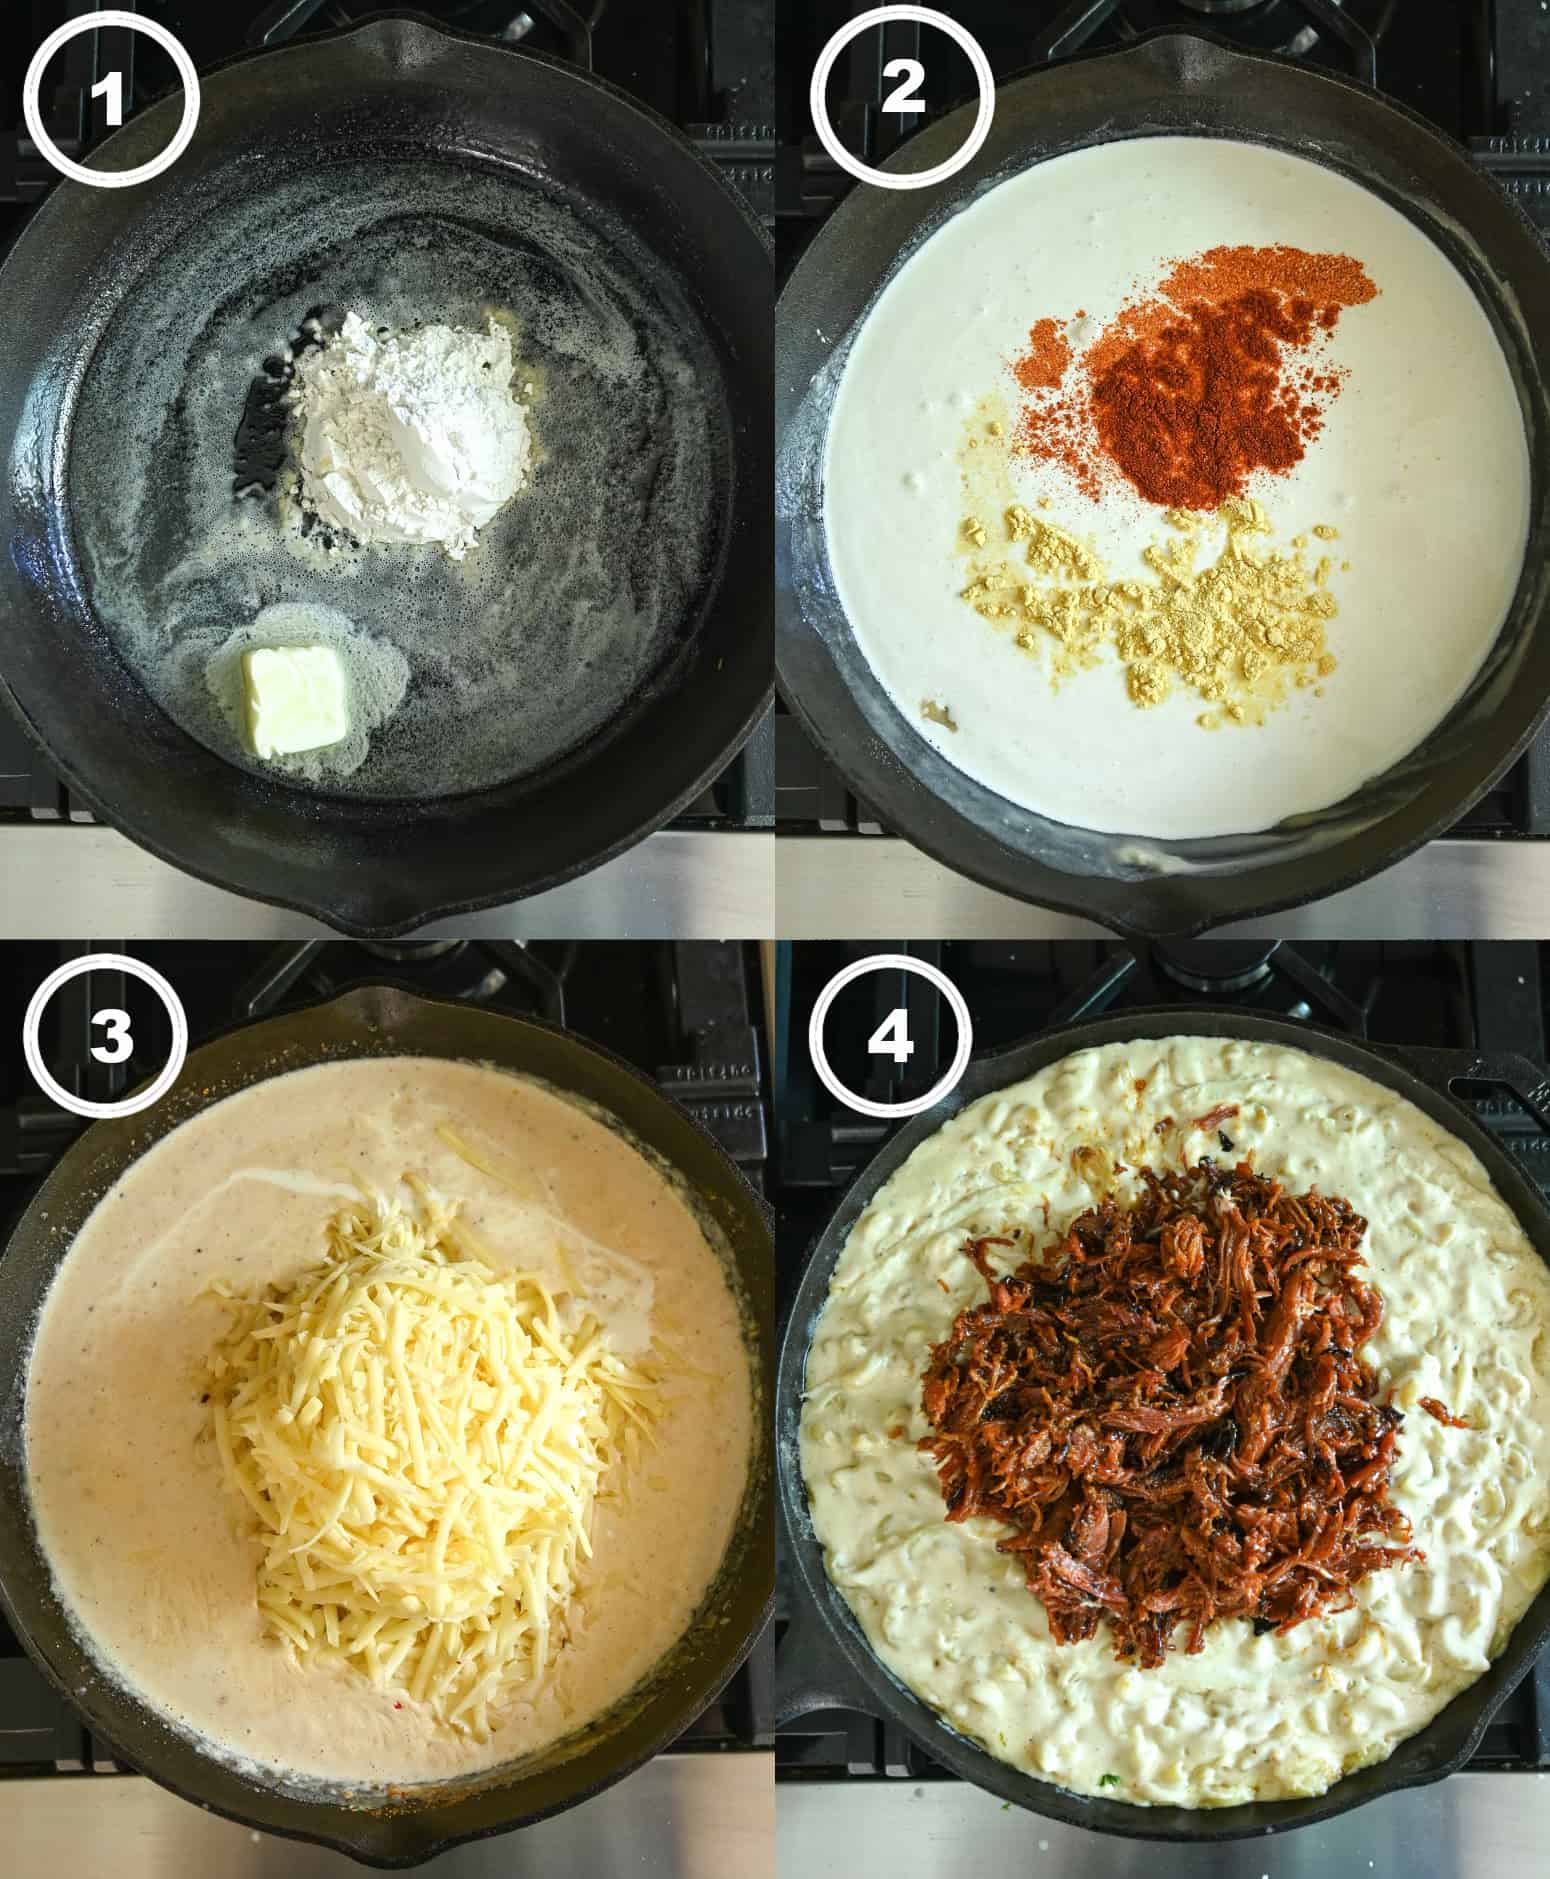 Four process photos. First one, melted butter in a cast iron skillet with flour sprinkled on top. Secone one, half and half has been added in along with spices. Third one, sgredded cheese has been added in. Fourth one, cooked pasta has been mised in and shredded pulled por added on top.